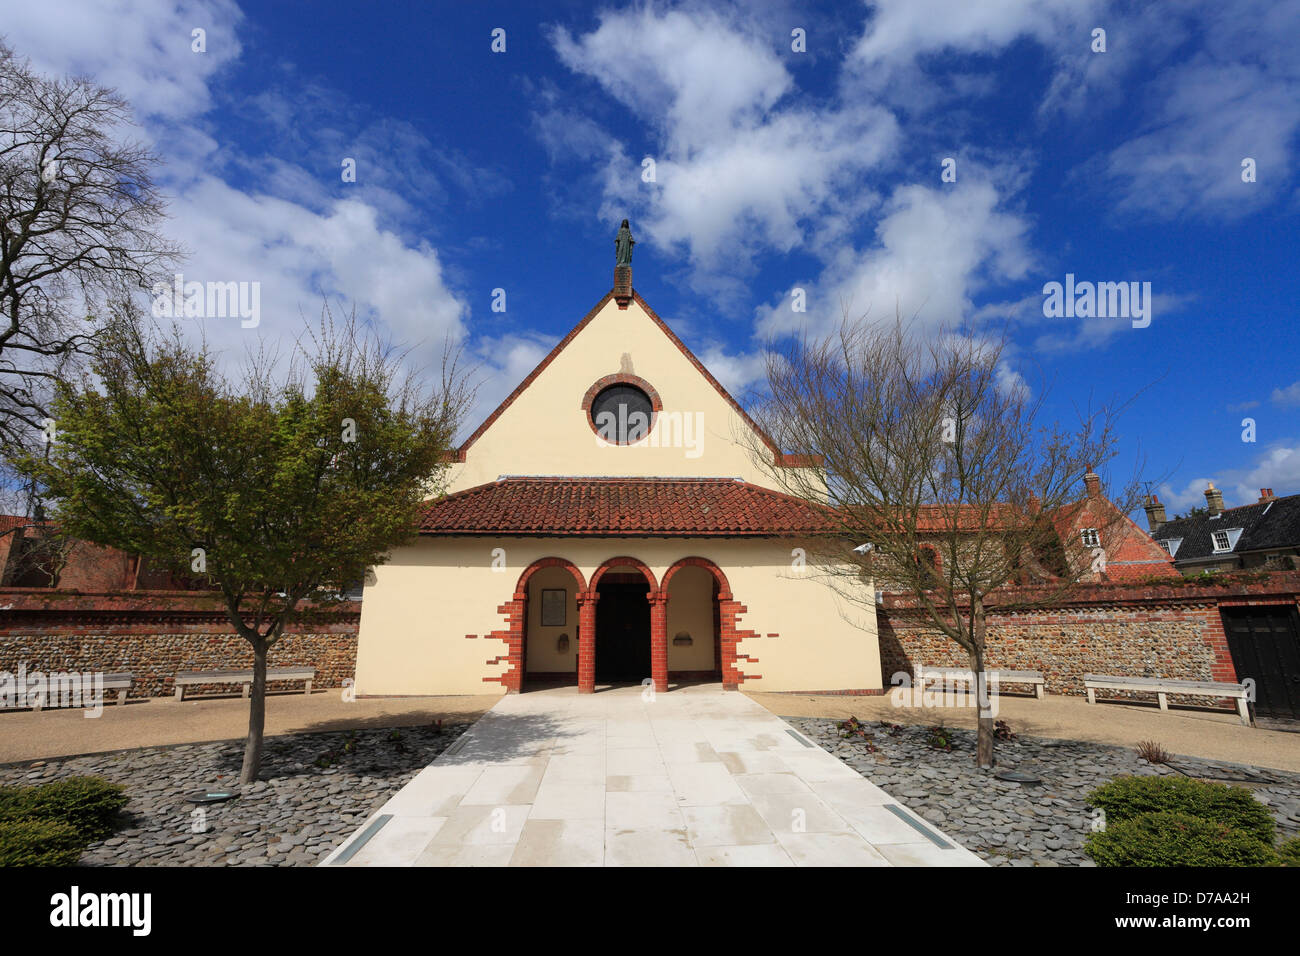 The Anglican Shrine church of Our Lady of Walsingham, Little Walsingham, Norfolk. Stock Photo